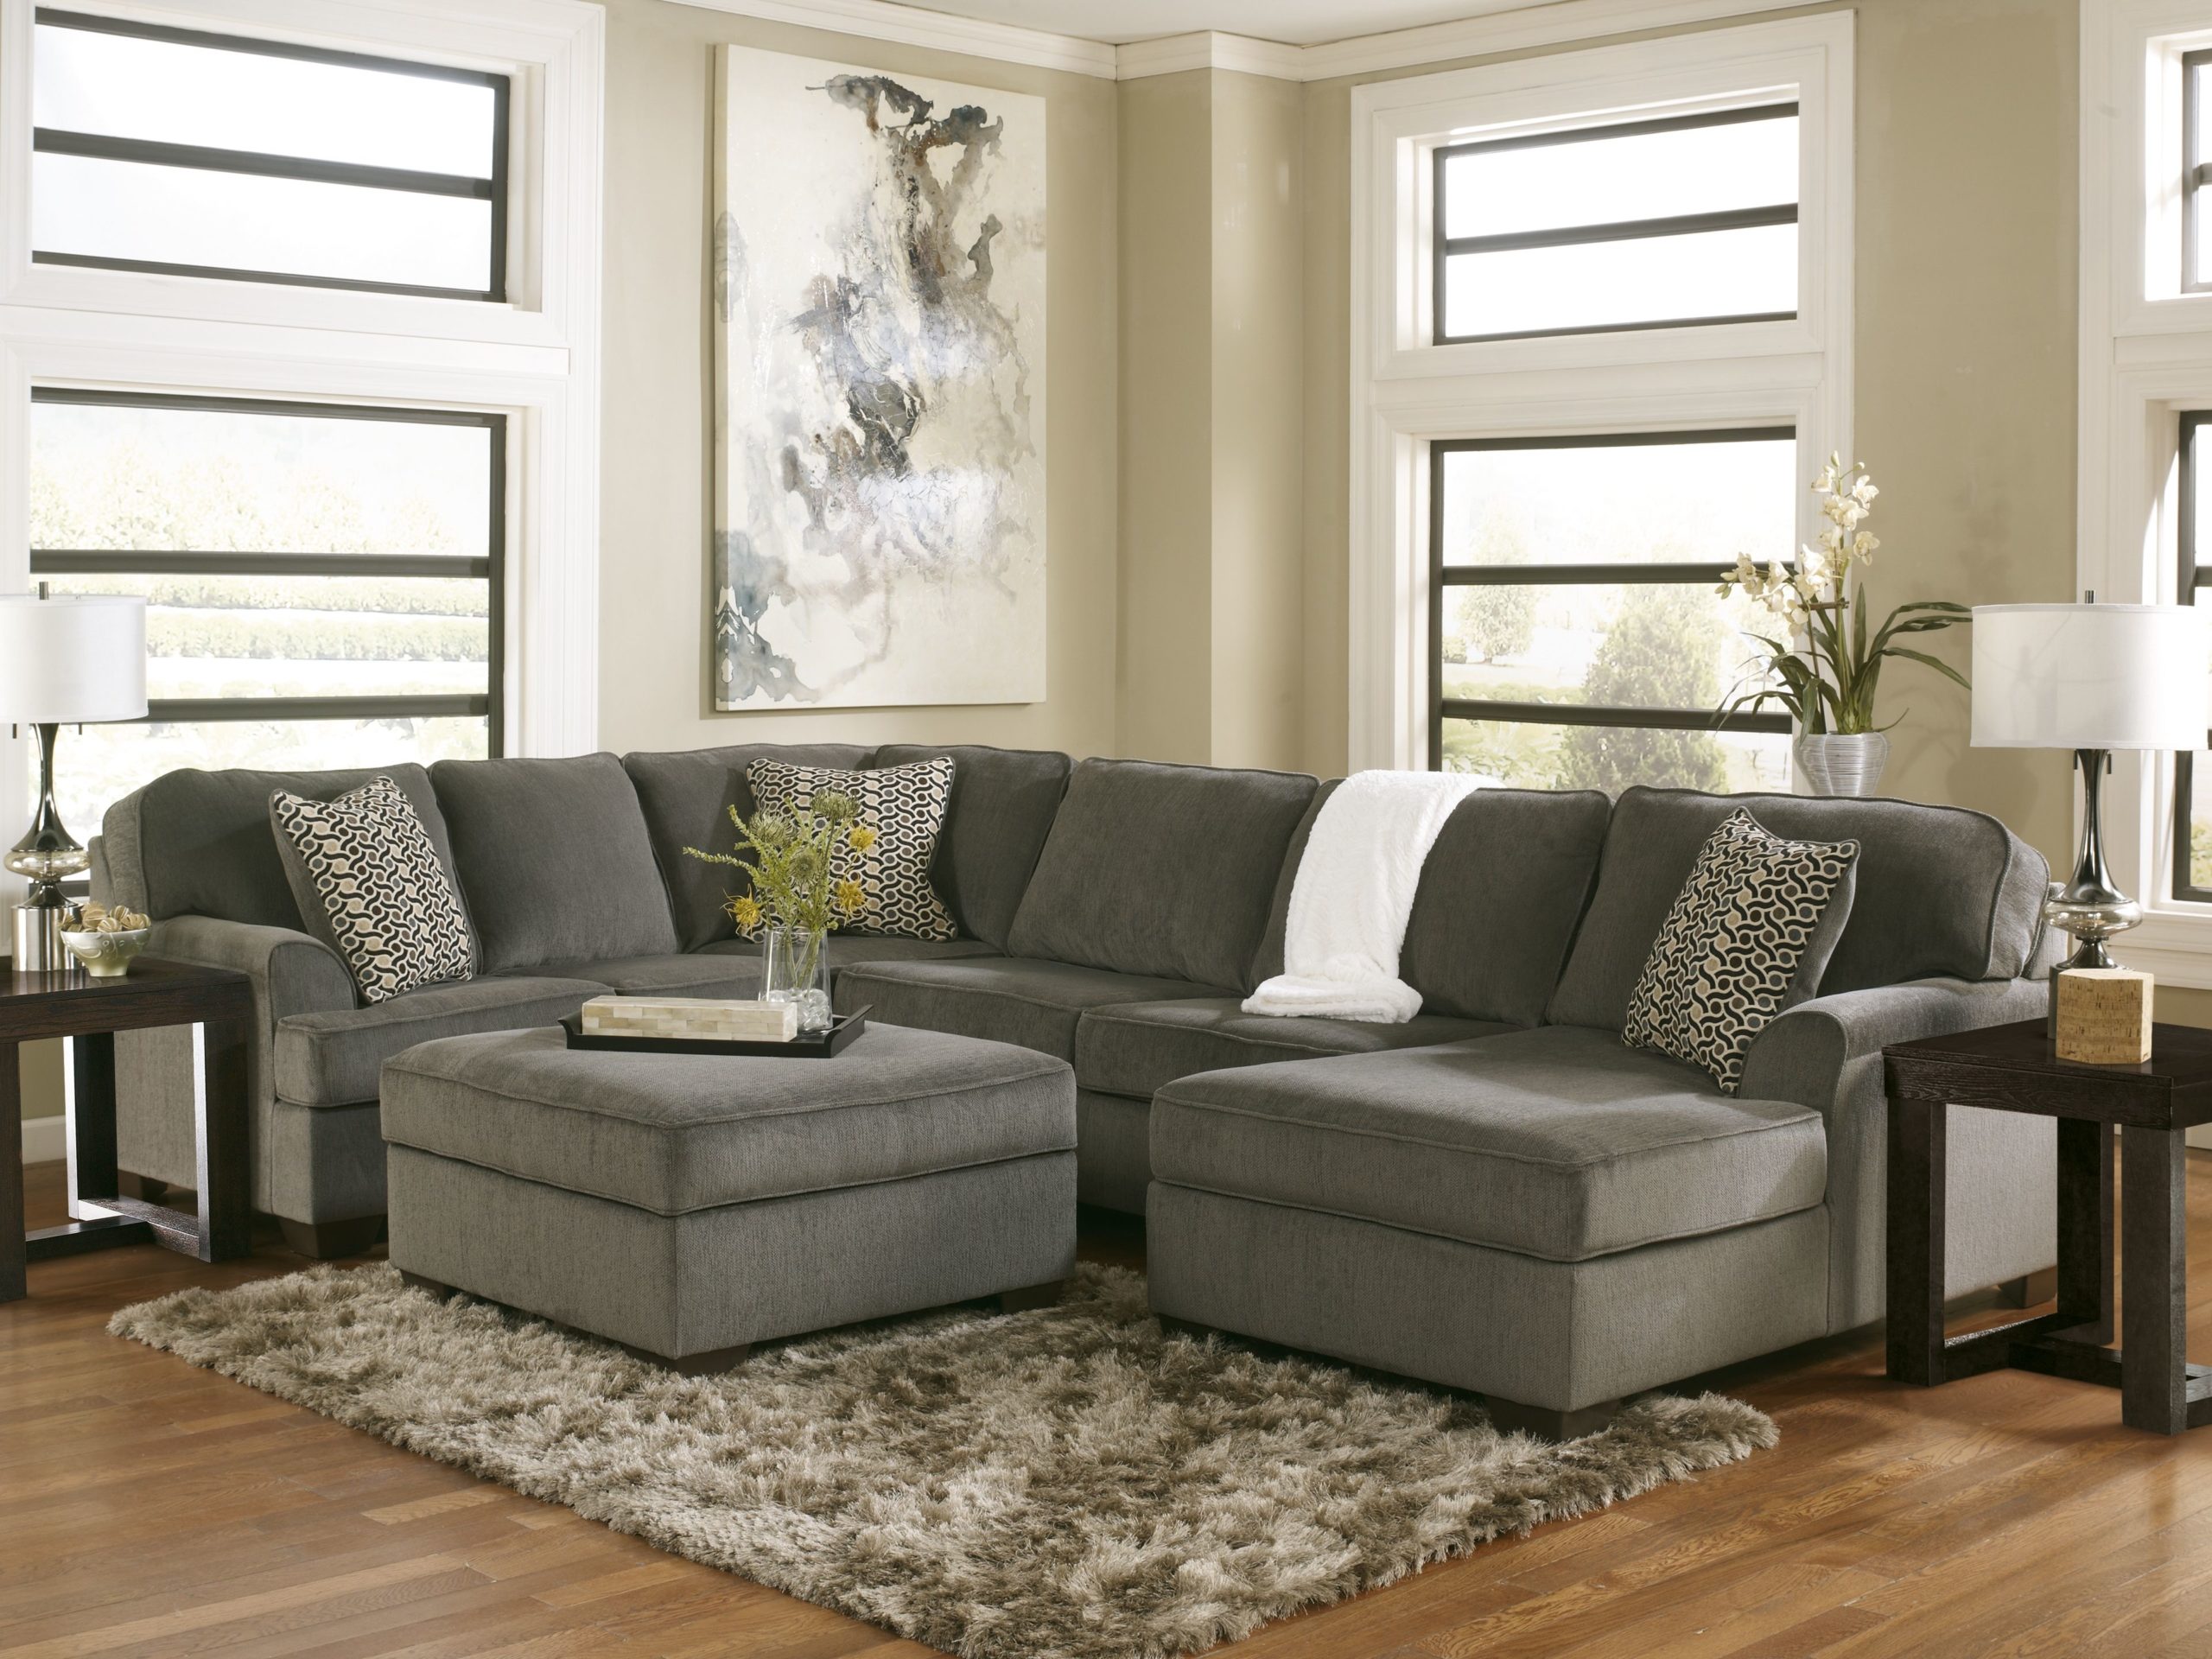 gray sectional couch living room ideas